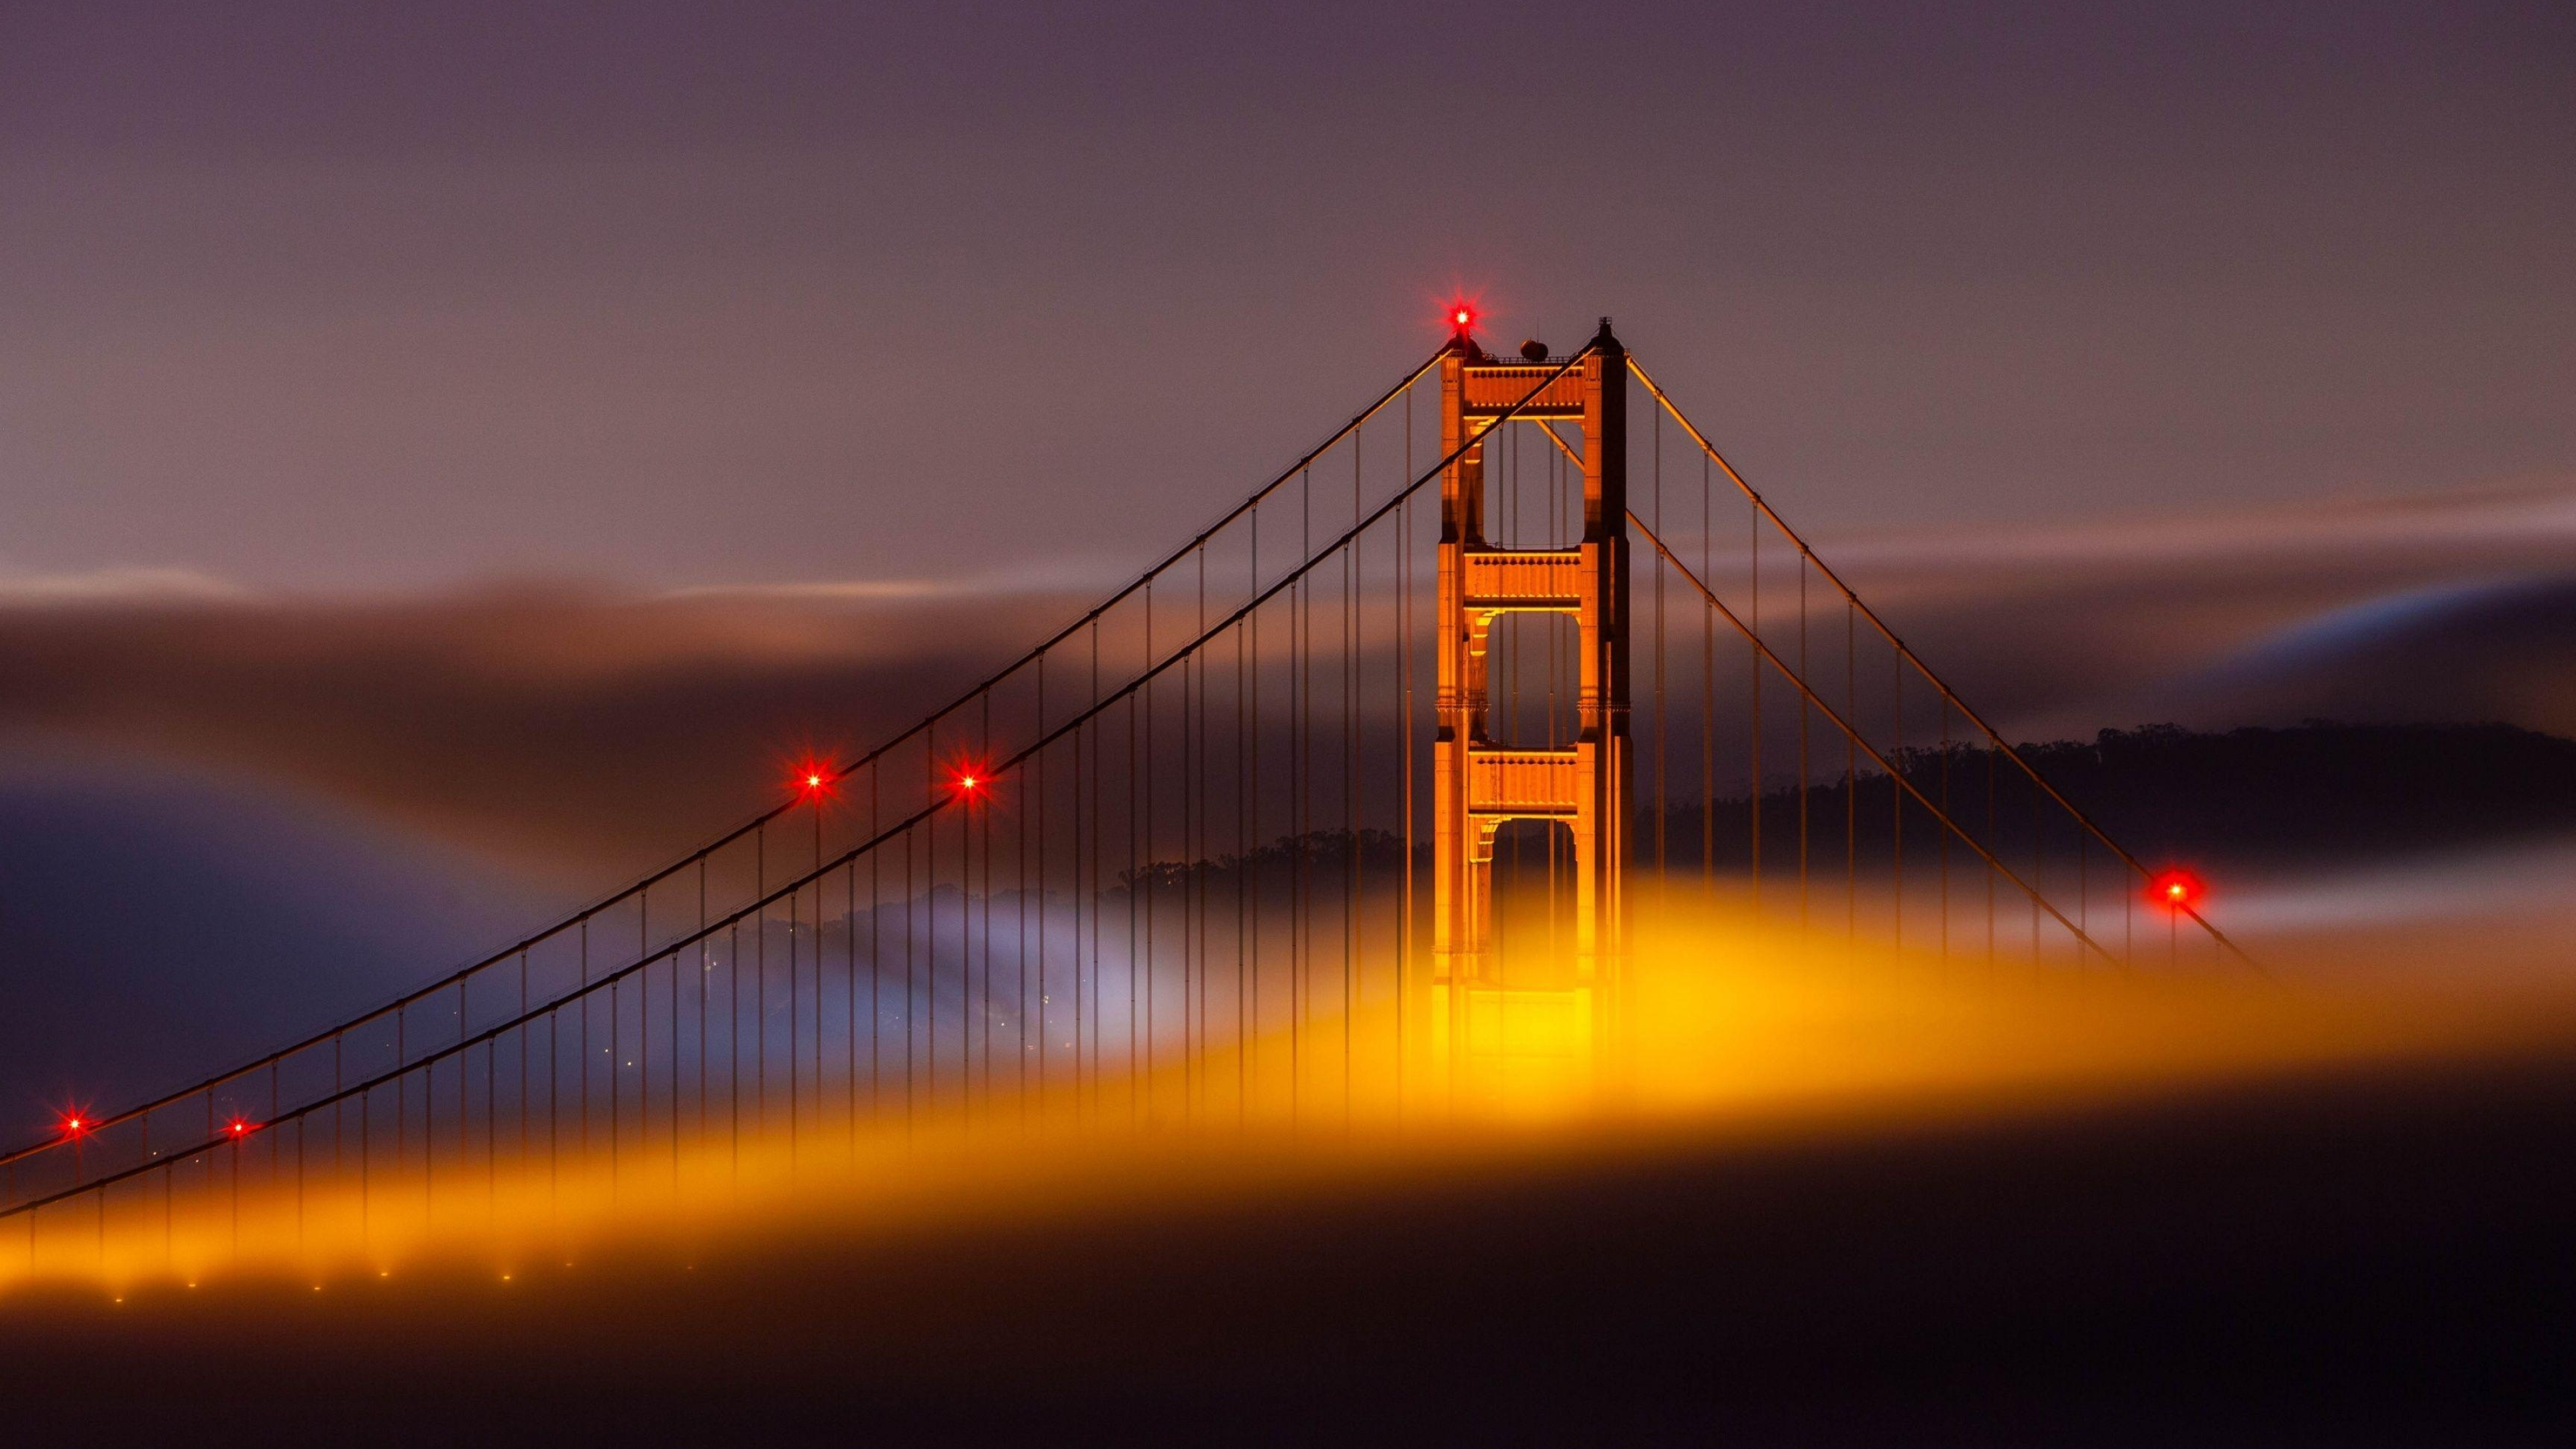 San Francisco: One of the most internationally recognized symbols of SF and CA. 3840x2160 4K Wallpaper.